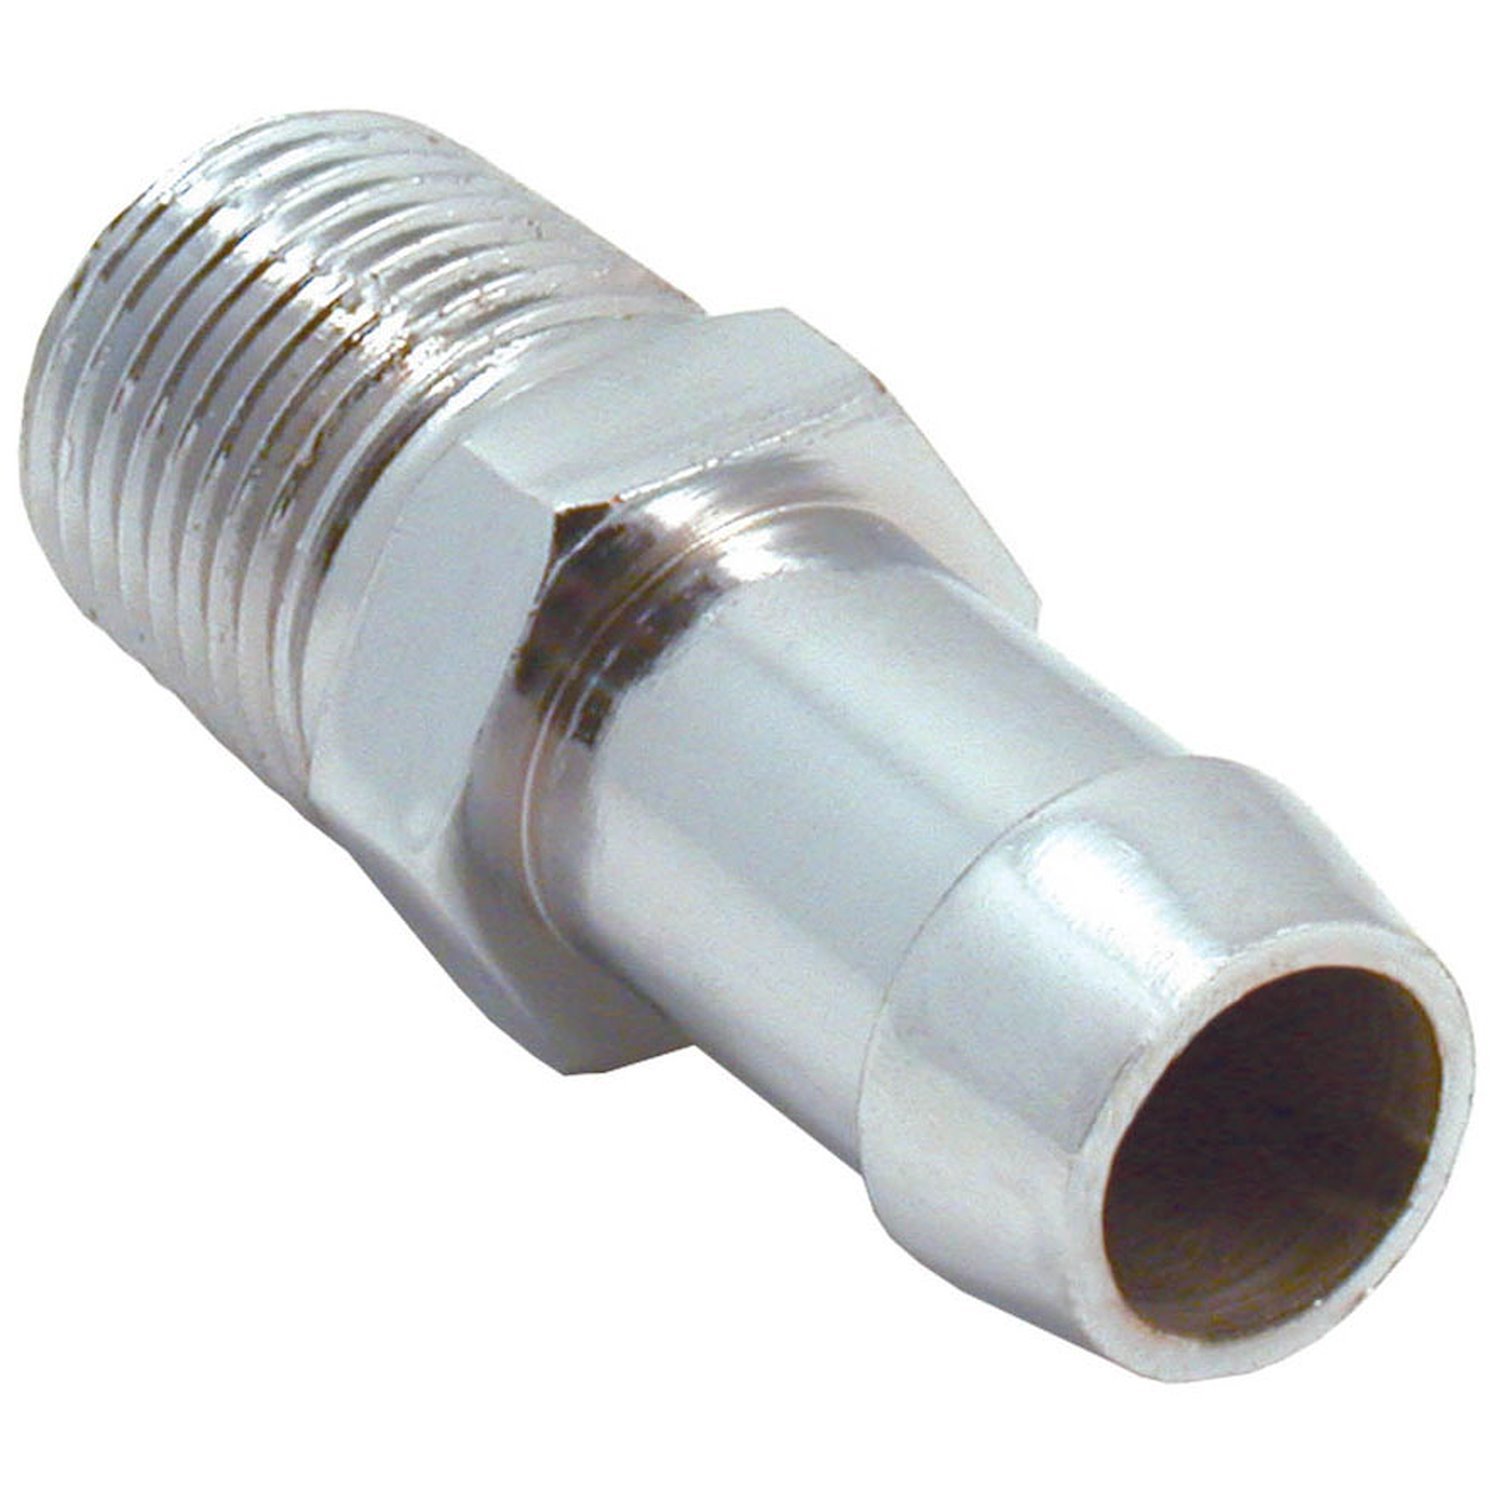 Heater Hose Fitting 1/2" NPT to 5/8" Barb